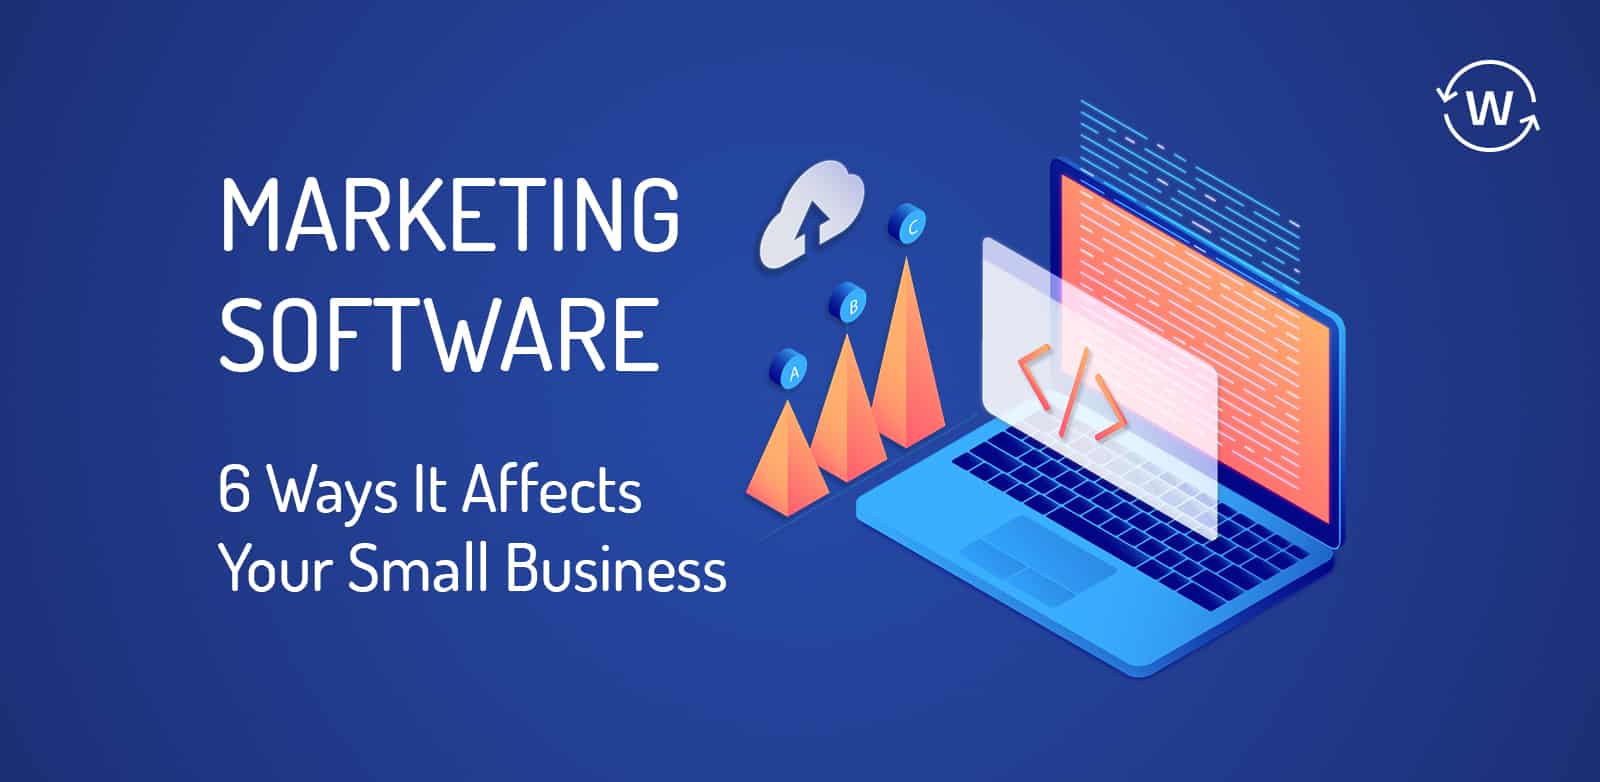 Marketing Software 6 Ways It Affects Your Small Business